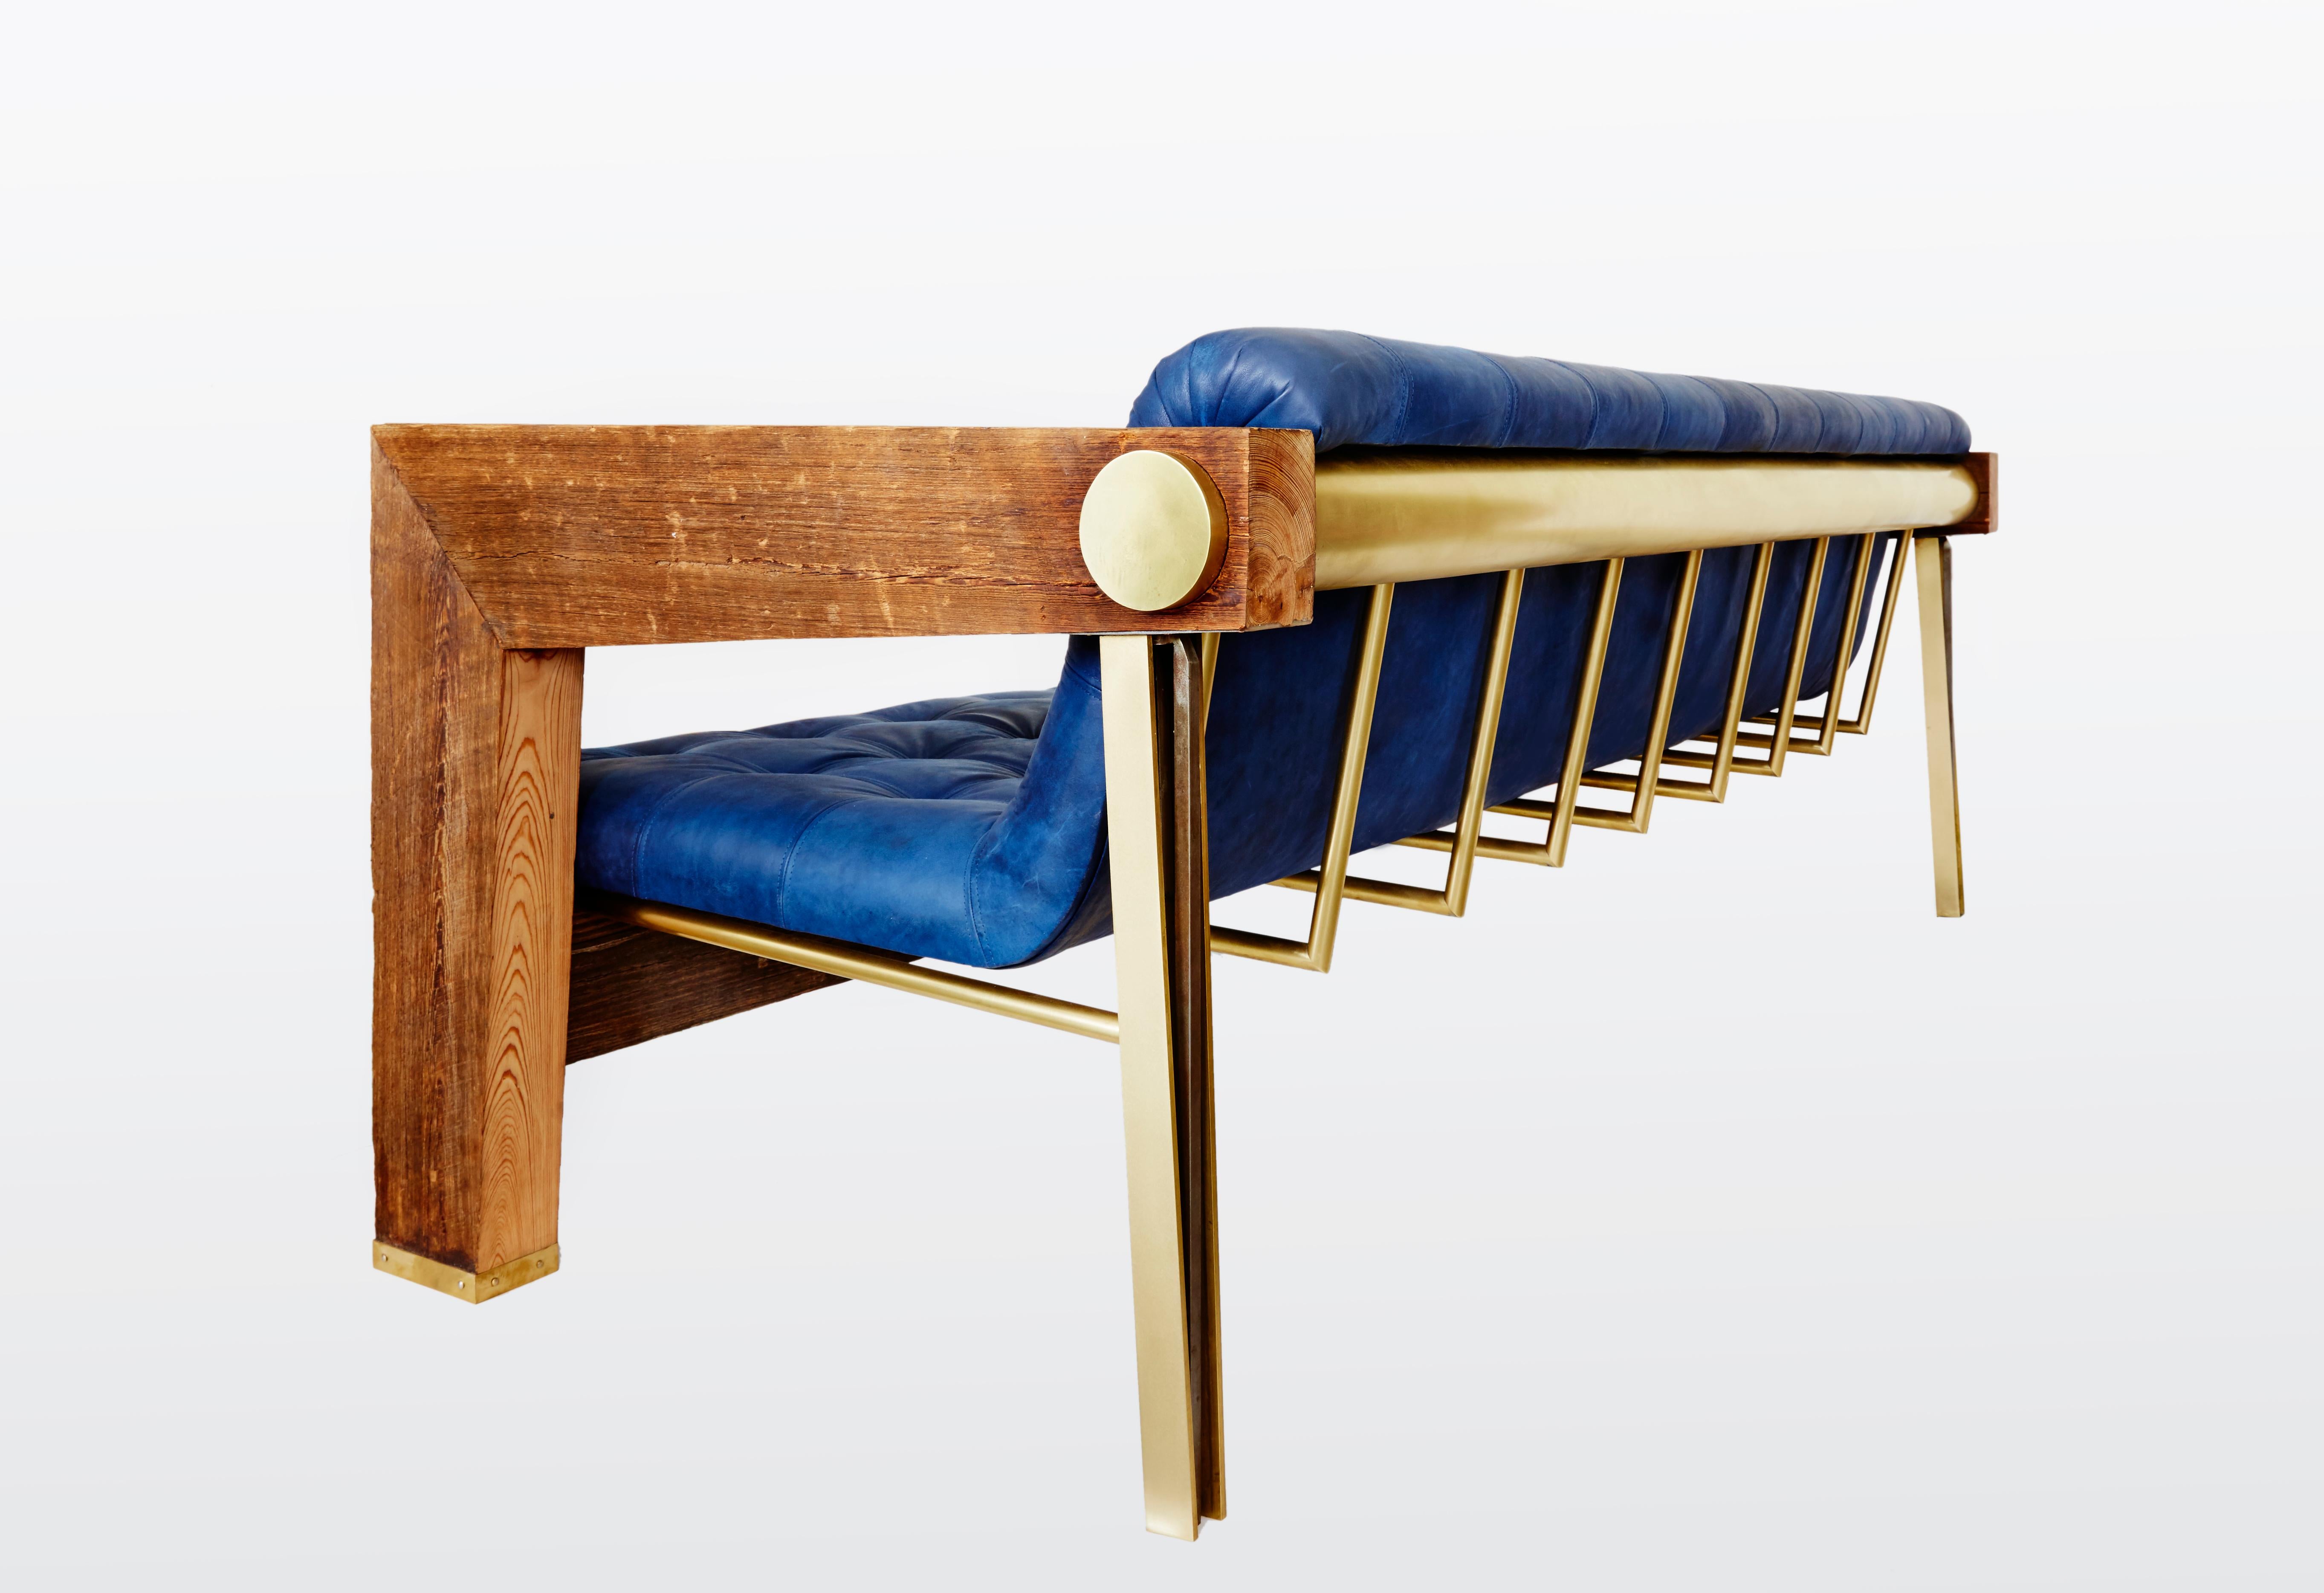 Rawdeco sofa in indigo dyed cow hide and pine by Cam Crockford 

Additional information:
Materials: Heart pine, burnished brass, indigo dyed cow hide
Dimensions: 81 W x 38 D x 36 H inches, seat height 14 inches.